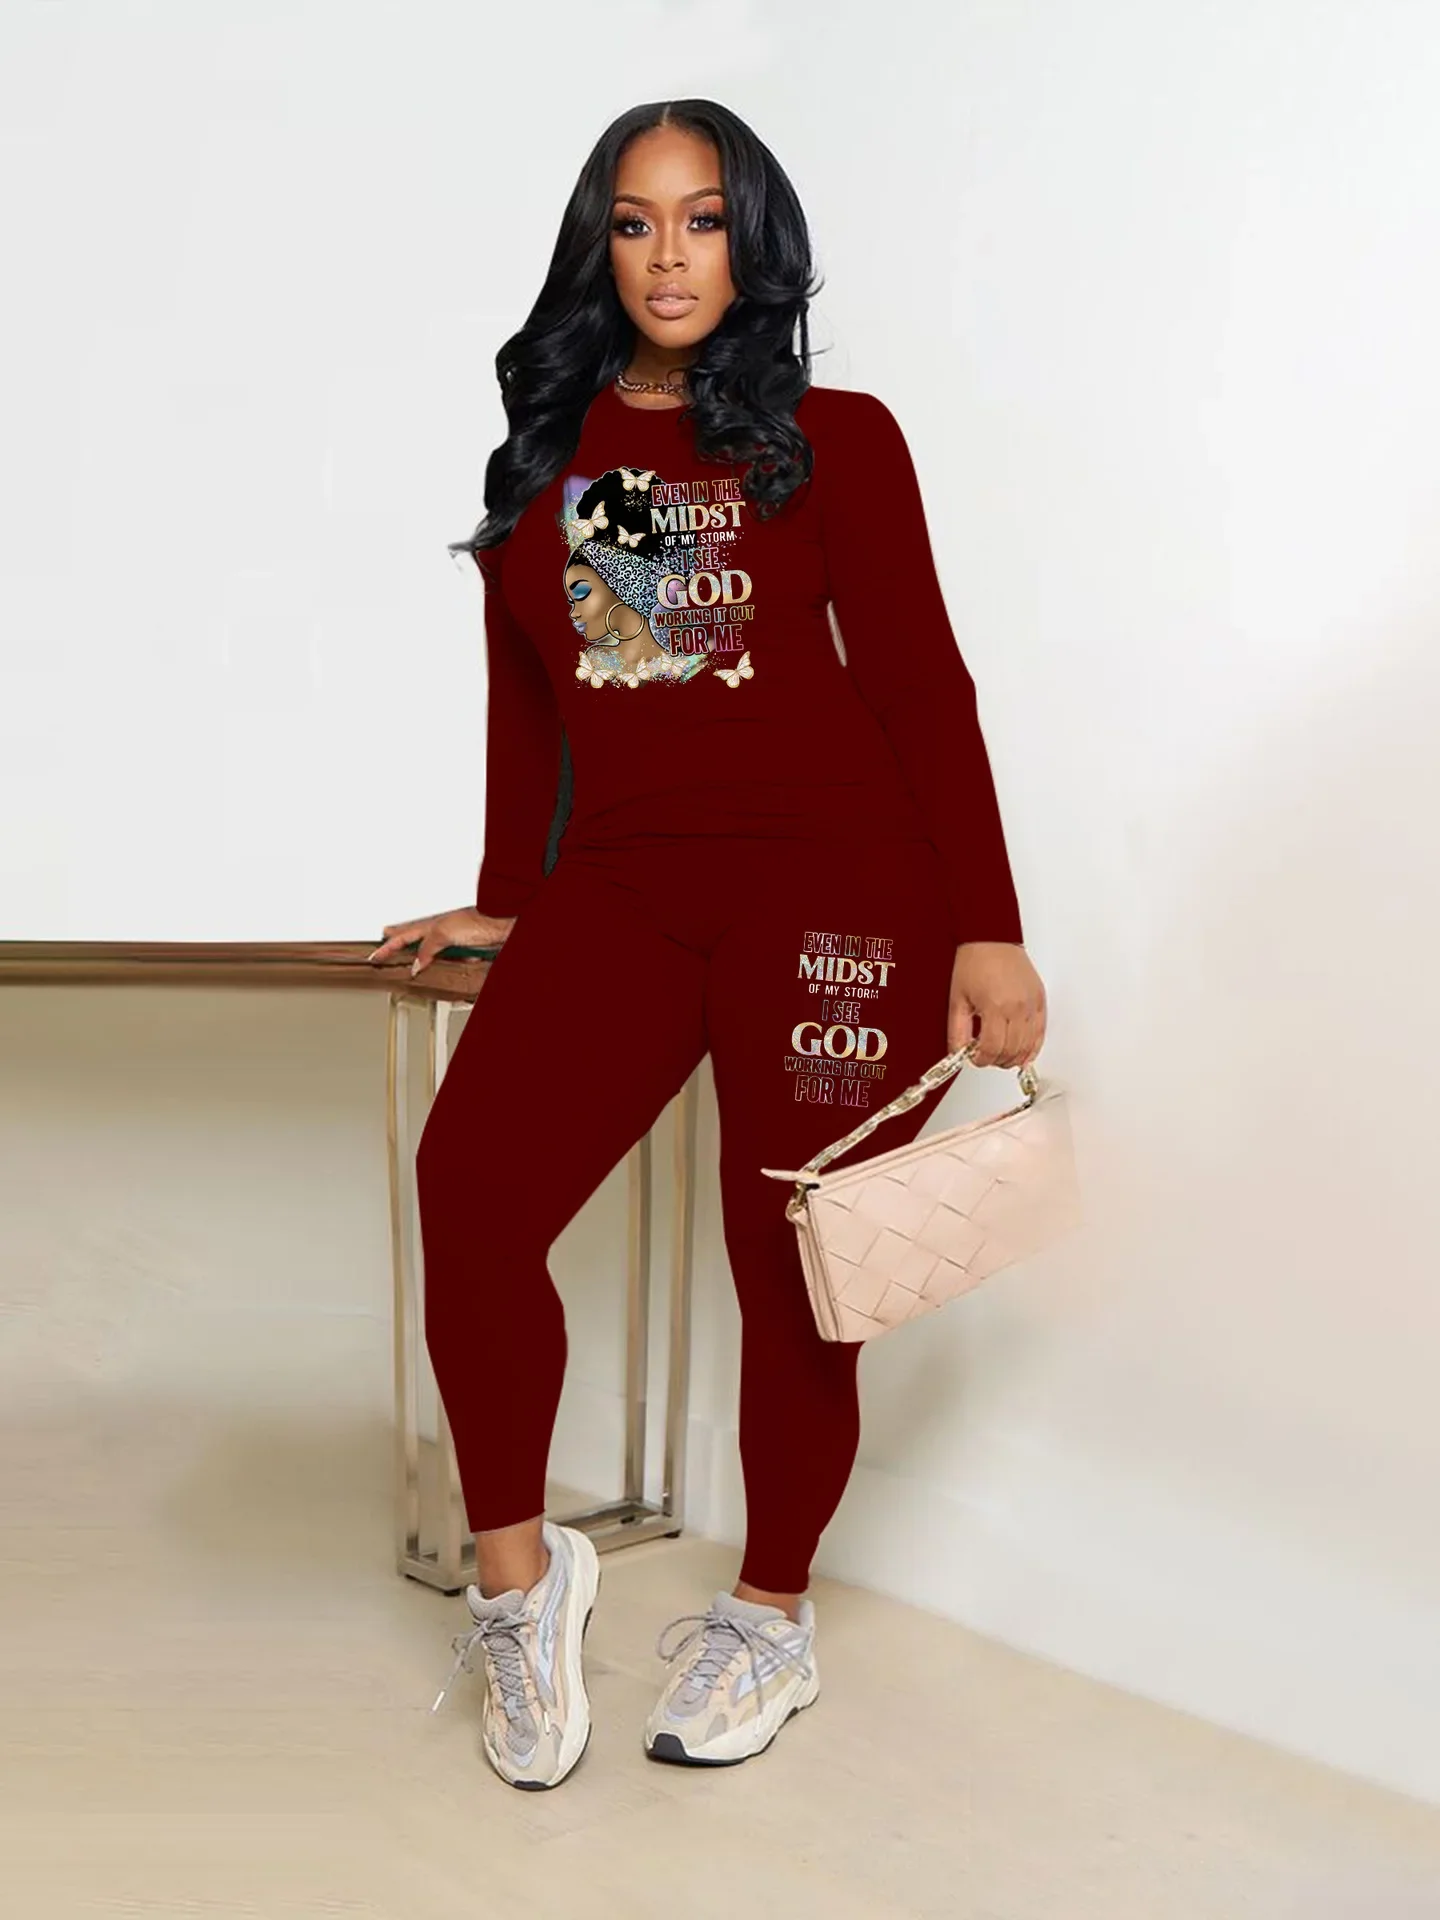 Women's Suit Autumn Fashion Athleisure Long Sleeve Top and Trousers Two Piece Set Printing O-Neck 2 Piece Sets Womens Outfits y2k printing woman clothing vintage jeans streetwear fashion hip hop pants high waist hand painted new loose wide leg trousers